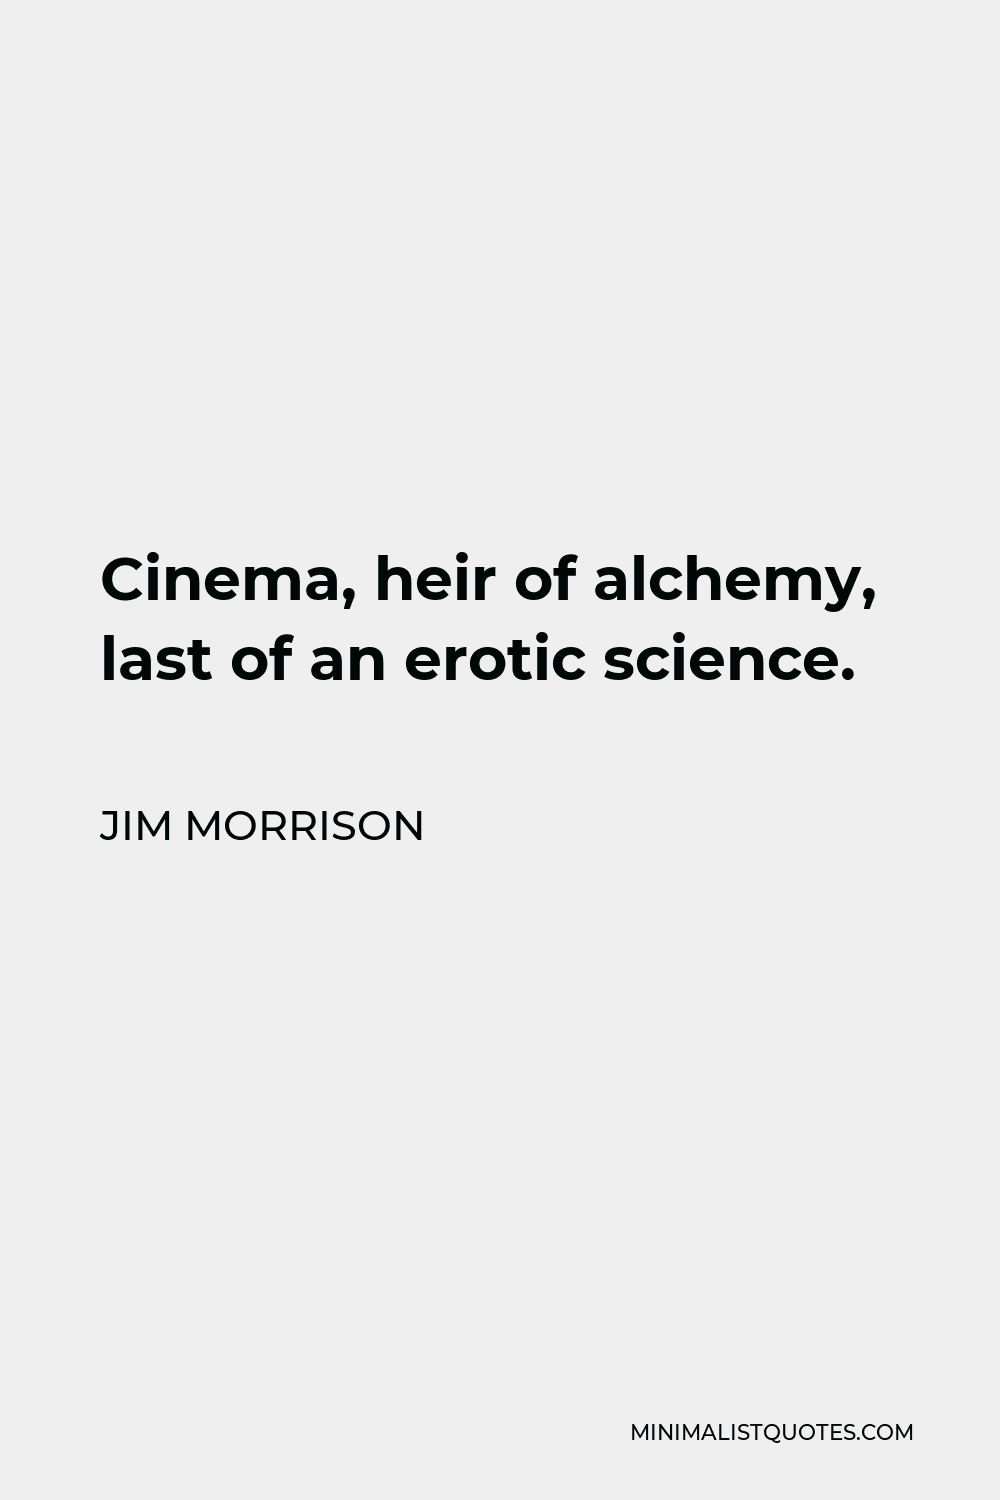 Jim Morrison Quote - Cinema, heir of alchemy, last of an erotic science.